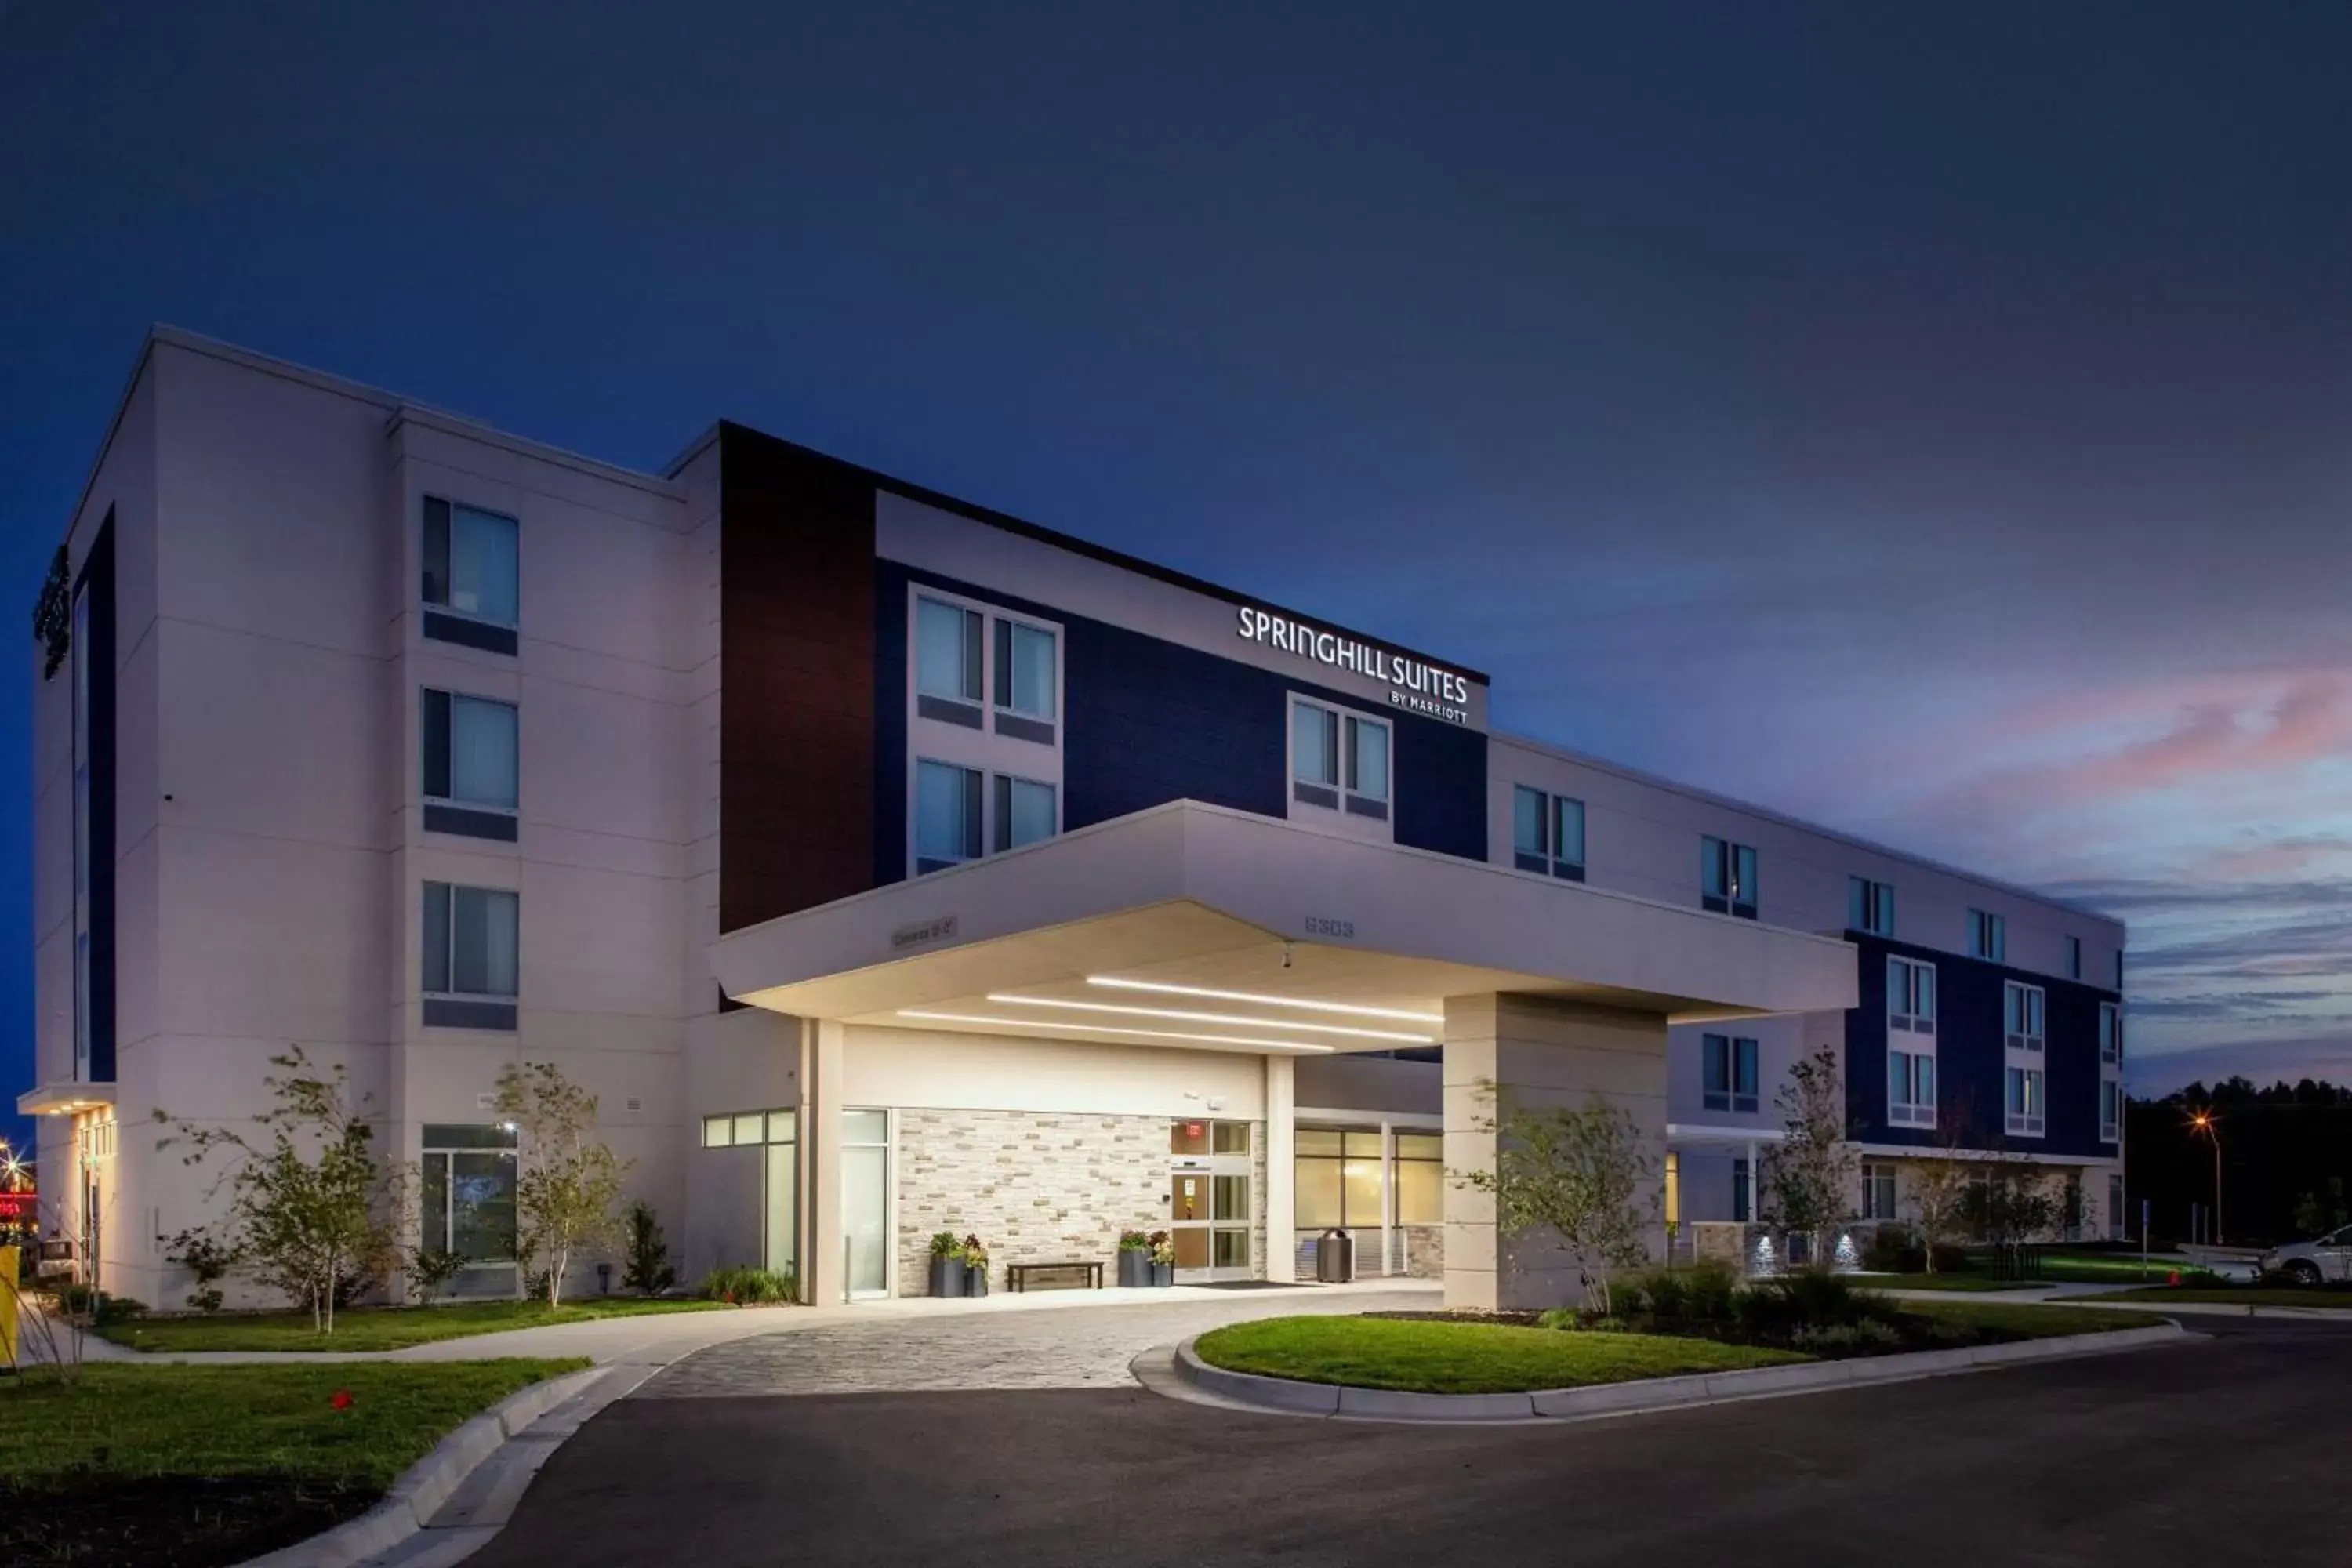 Property Building in SpringHill Suites Kansas City Airport